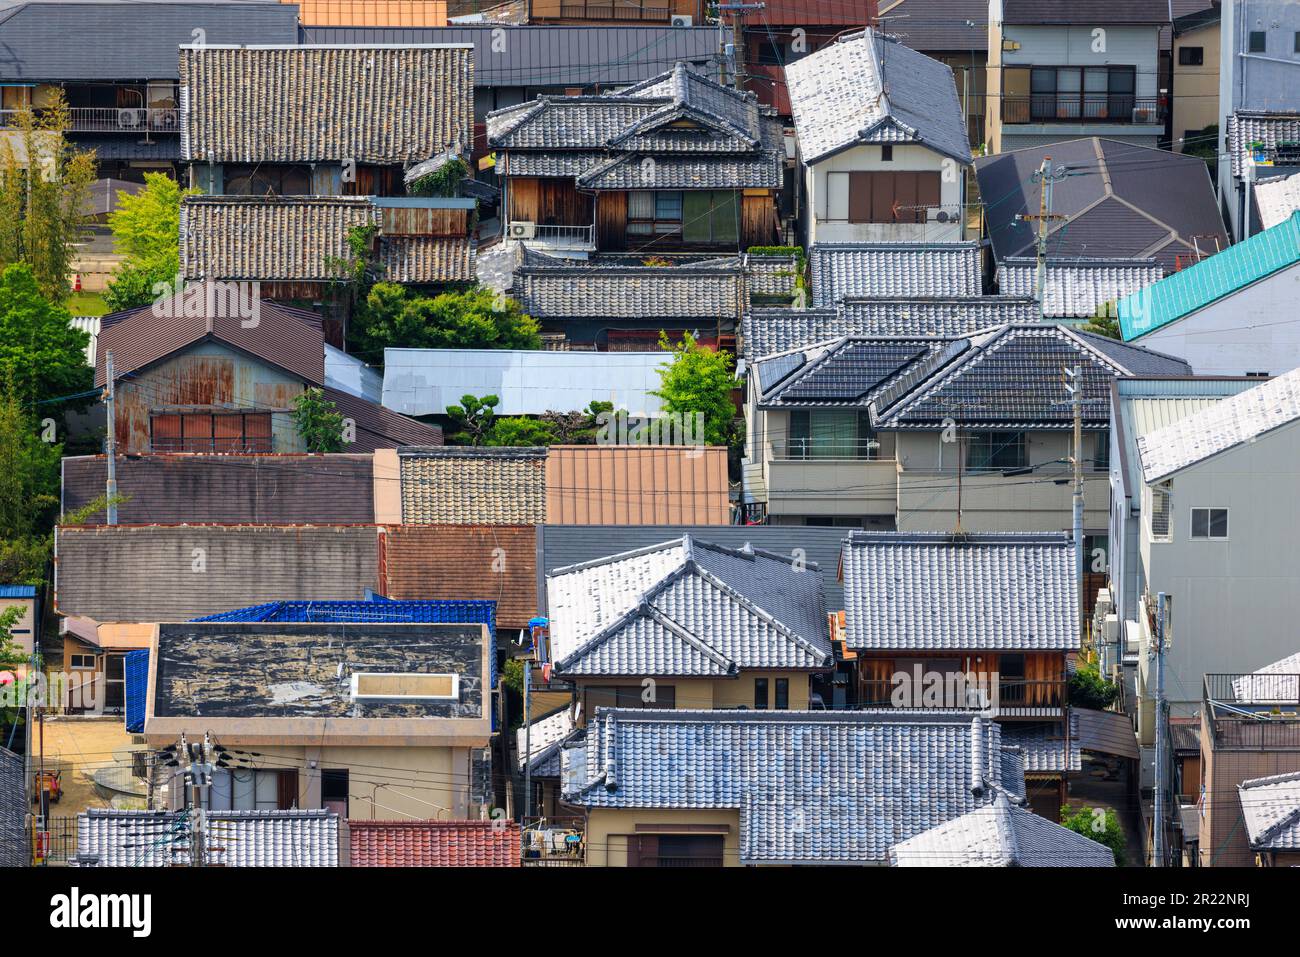 Looking down on roofs of old houses in small town Japan Stock Photo